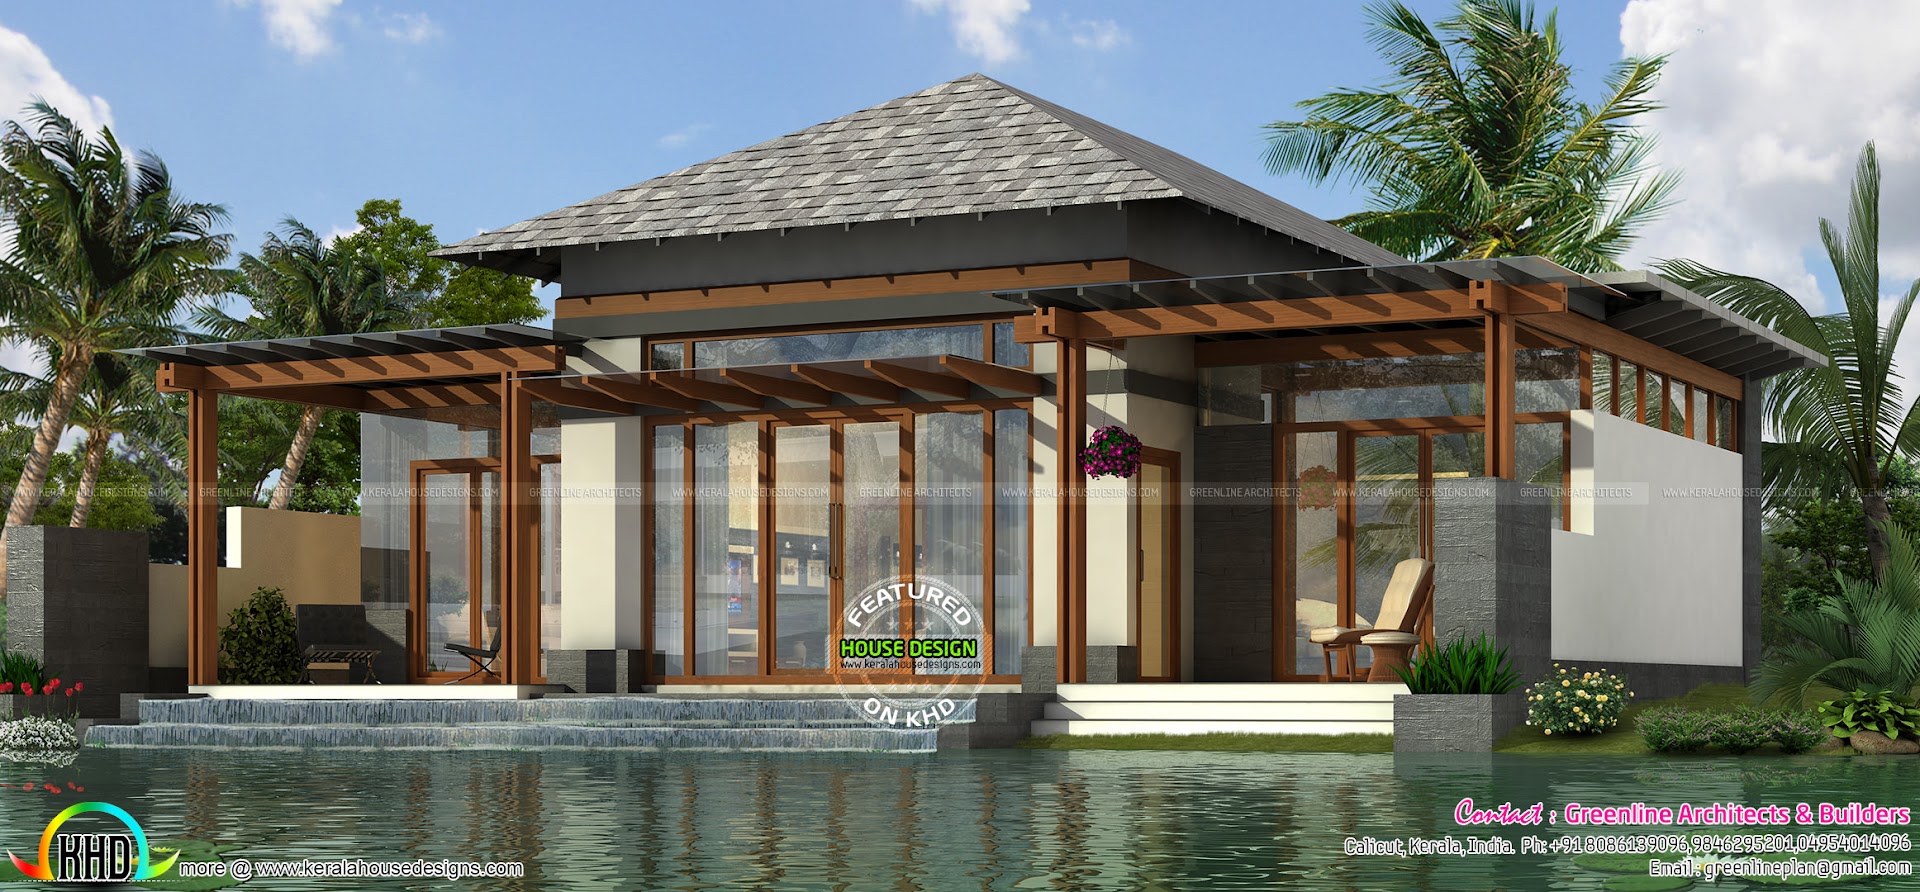  Luxury  small  home  plan  1303 sq ft Kerala home  design  and 